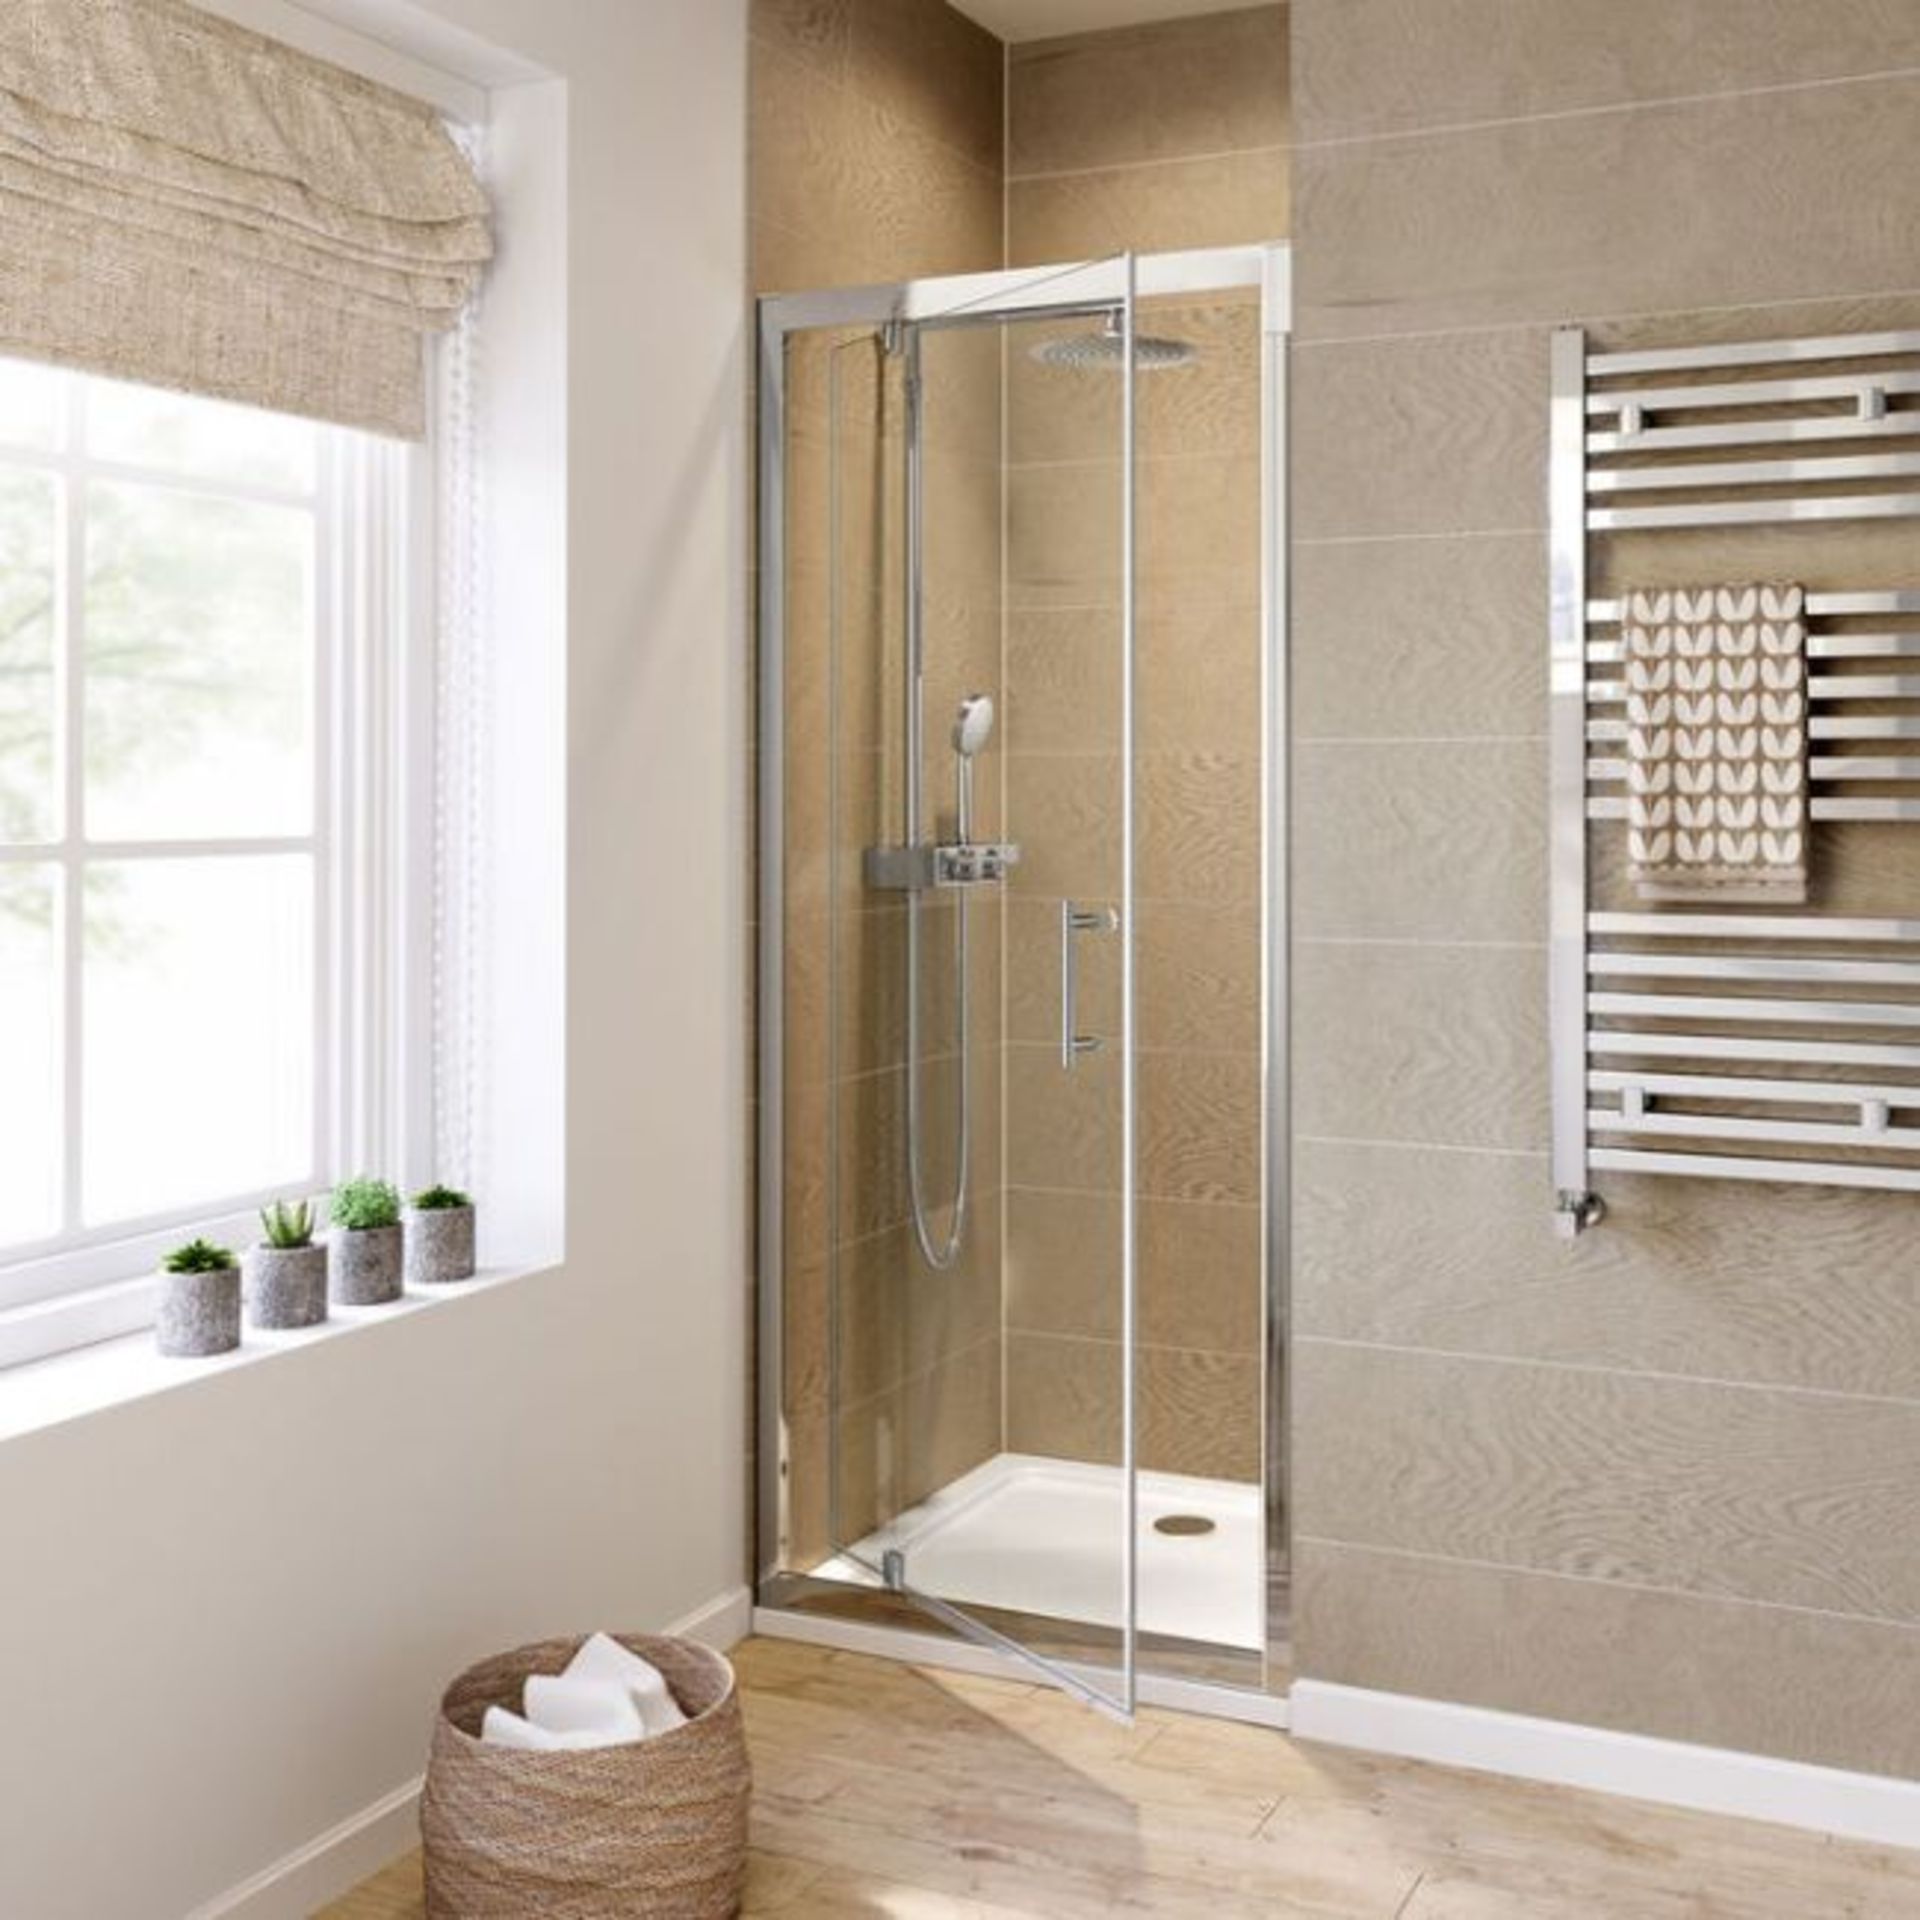 New Twyfords 800mm - 6mm Elements Pivot Shower Door. Rrp £299.99.Of4100Cp. 6mm Safety Glass ... - Image 2 of 2